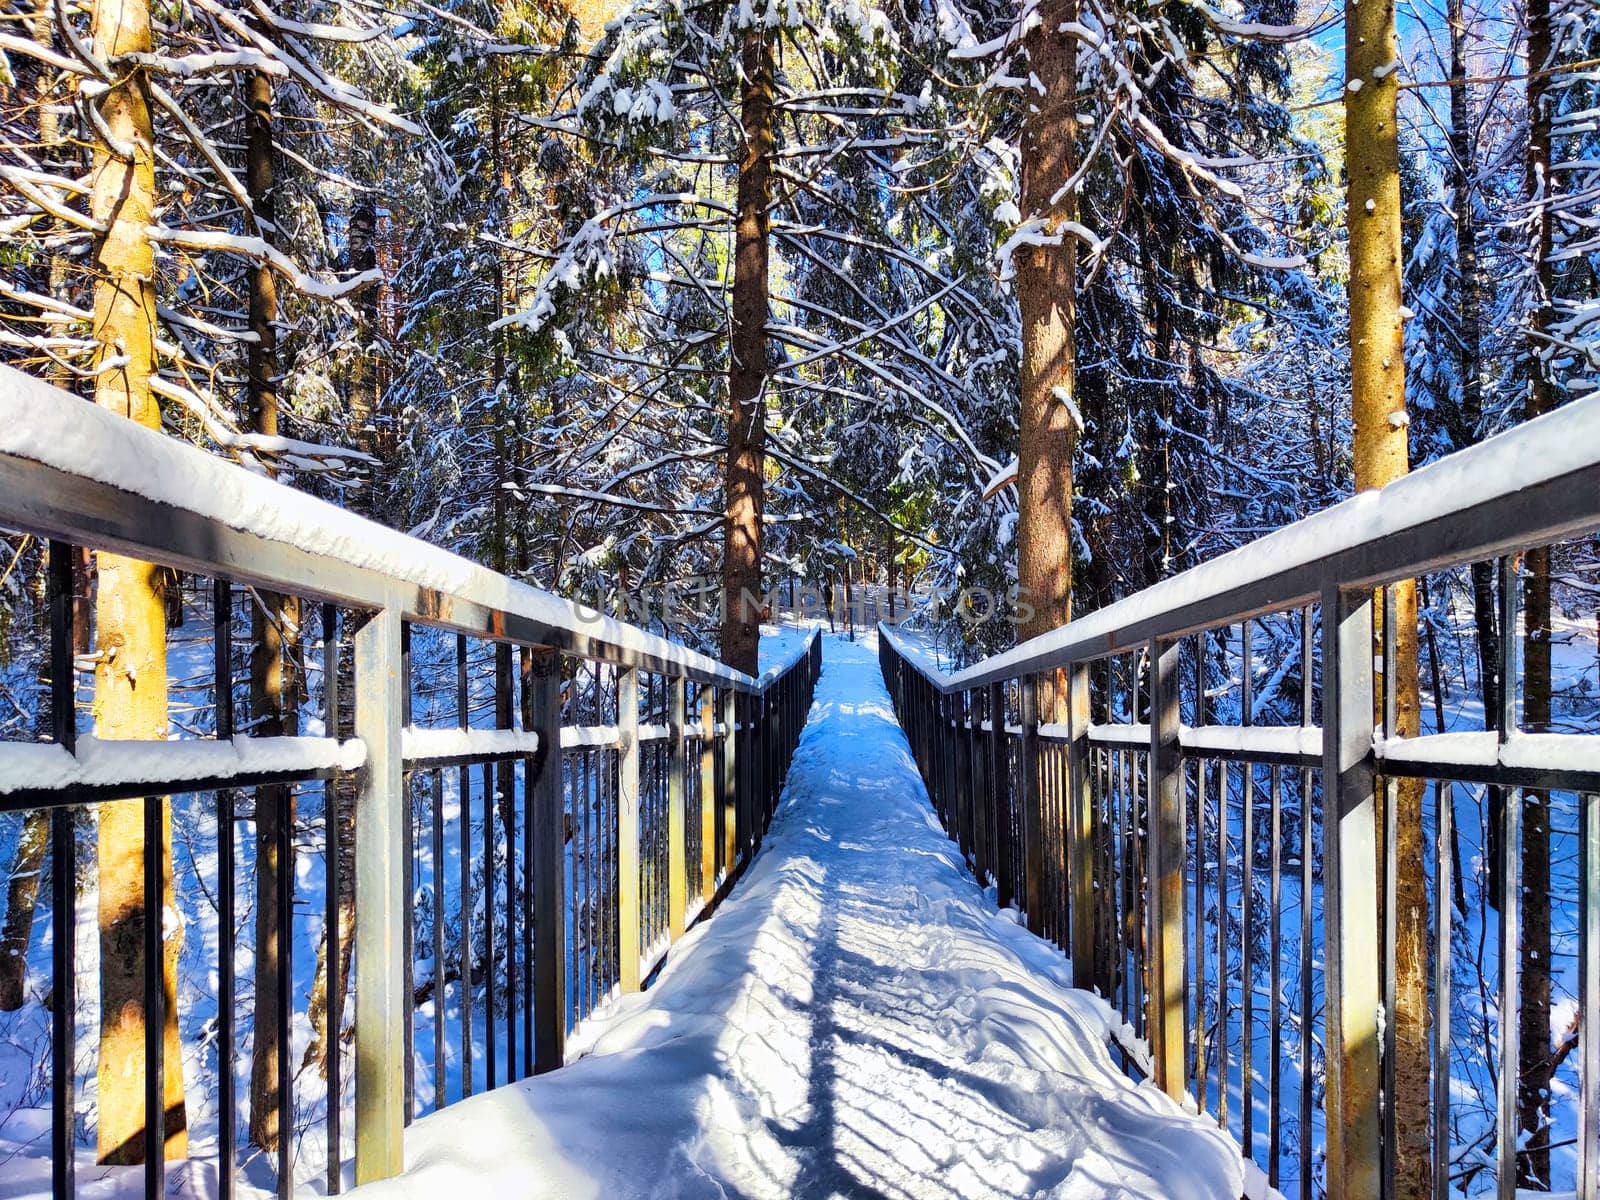 Snow-Covered Bridge in a Pine Forest on a Sunny Winter Day. A bridge blanketed with snow winds through a pine forest under a clear blue sky by keleny